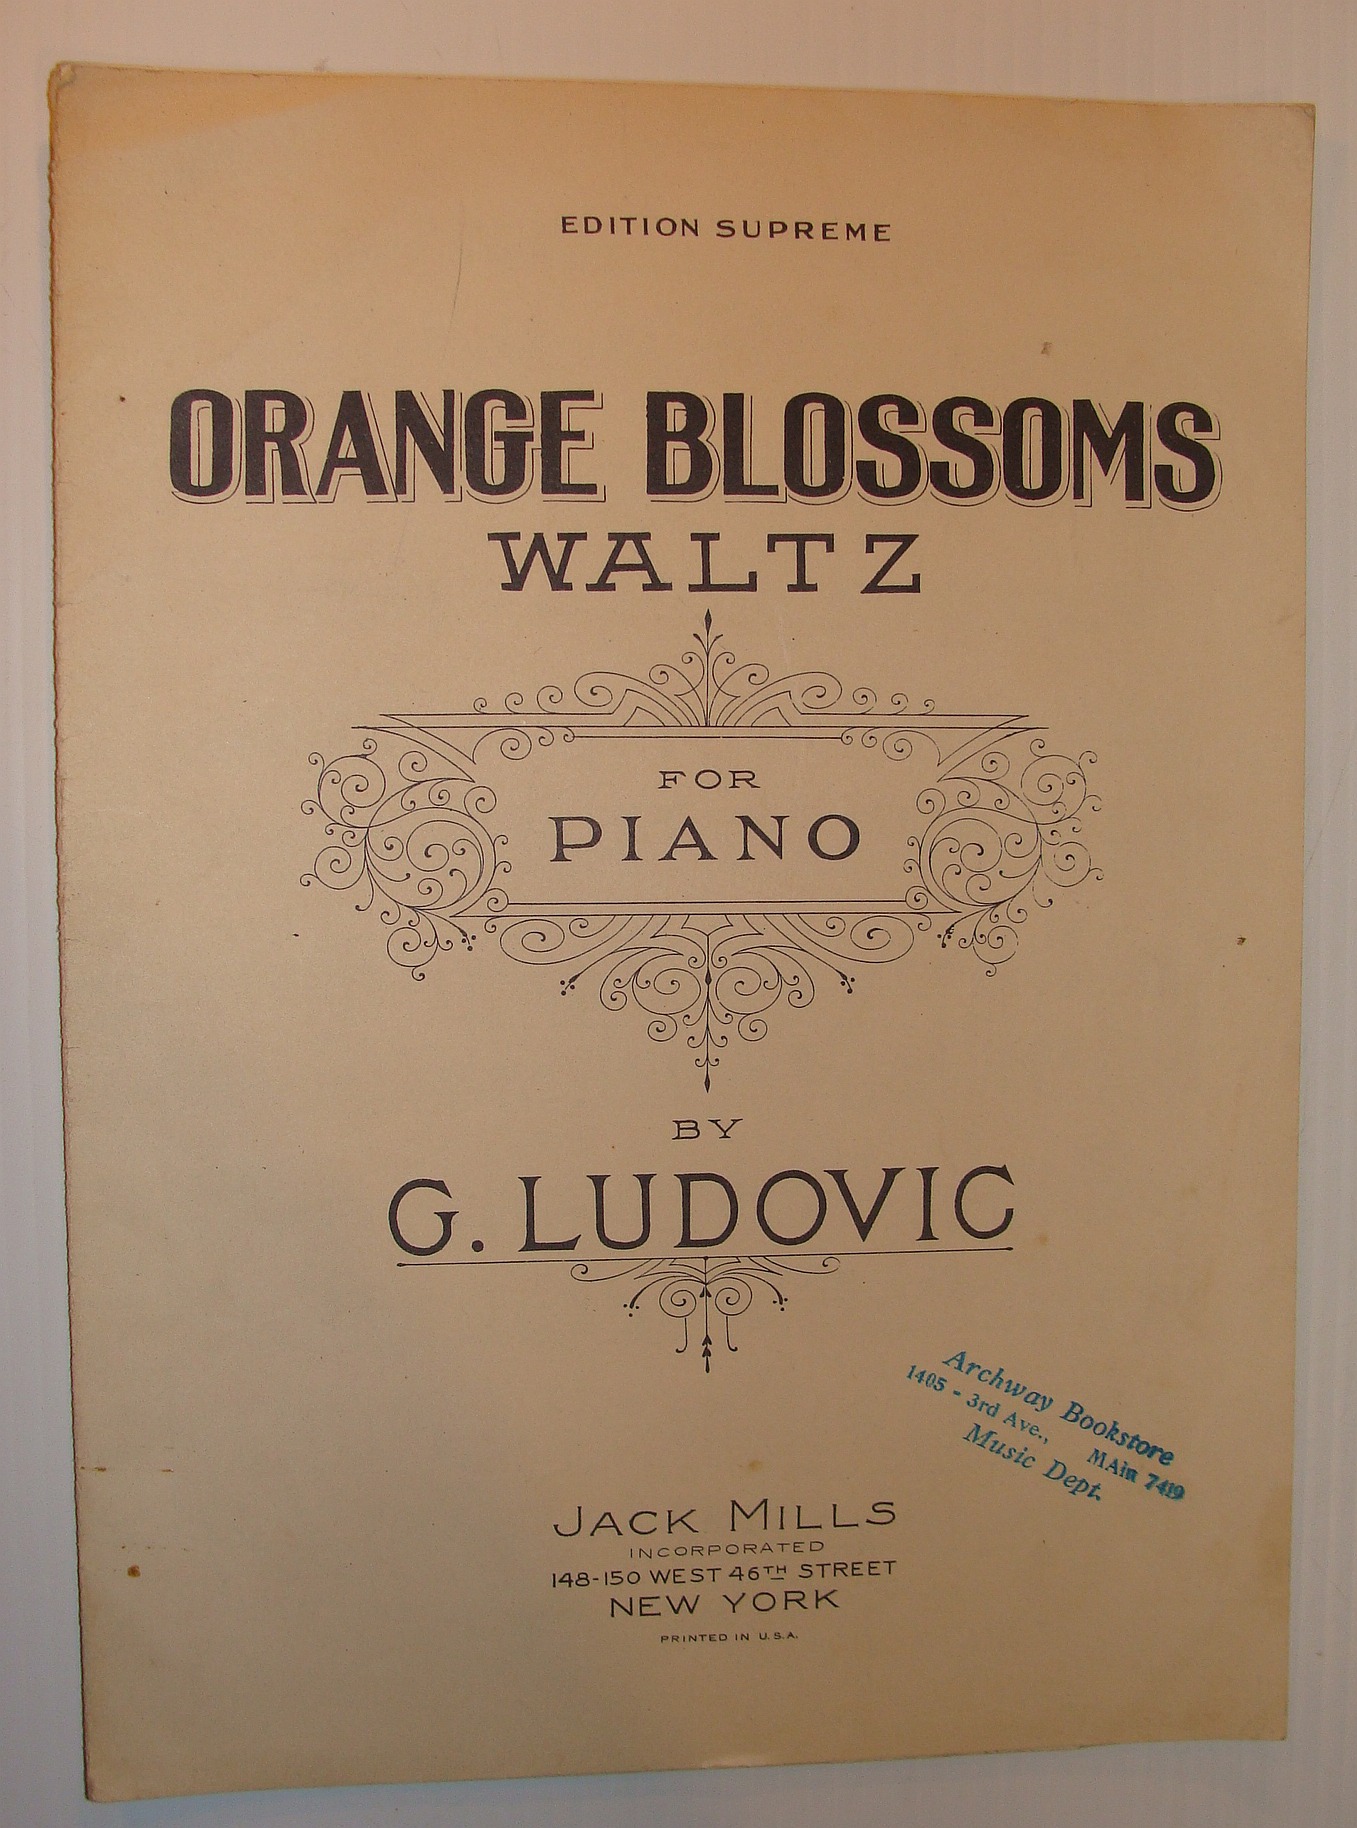 LUDOVIC, G. (REVISED AND EDITED BY F. HENRI KLICKMANN) - Orange Blossoms Waltz: Sheet Music for Piano